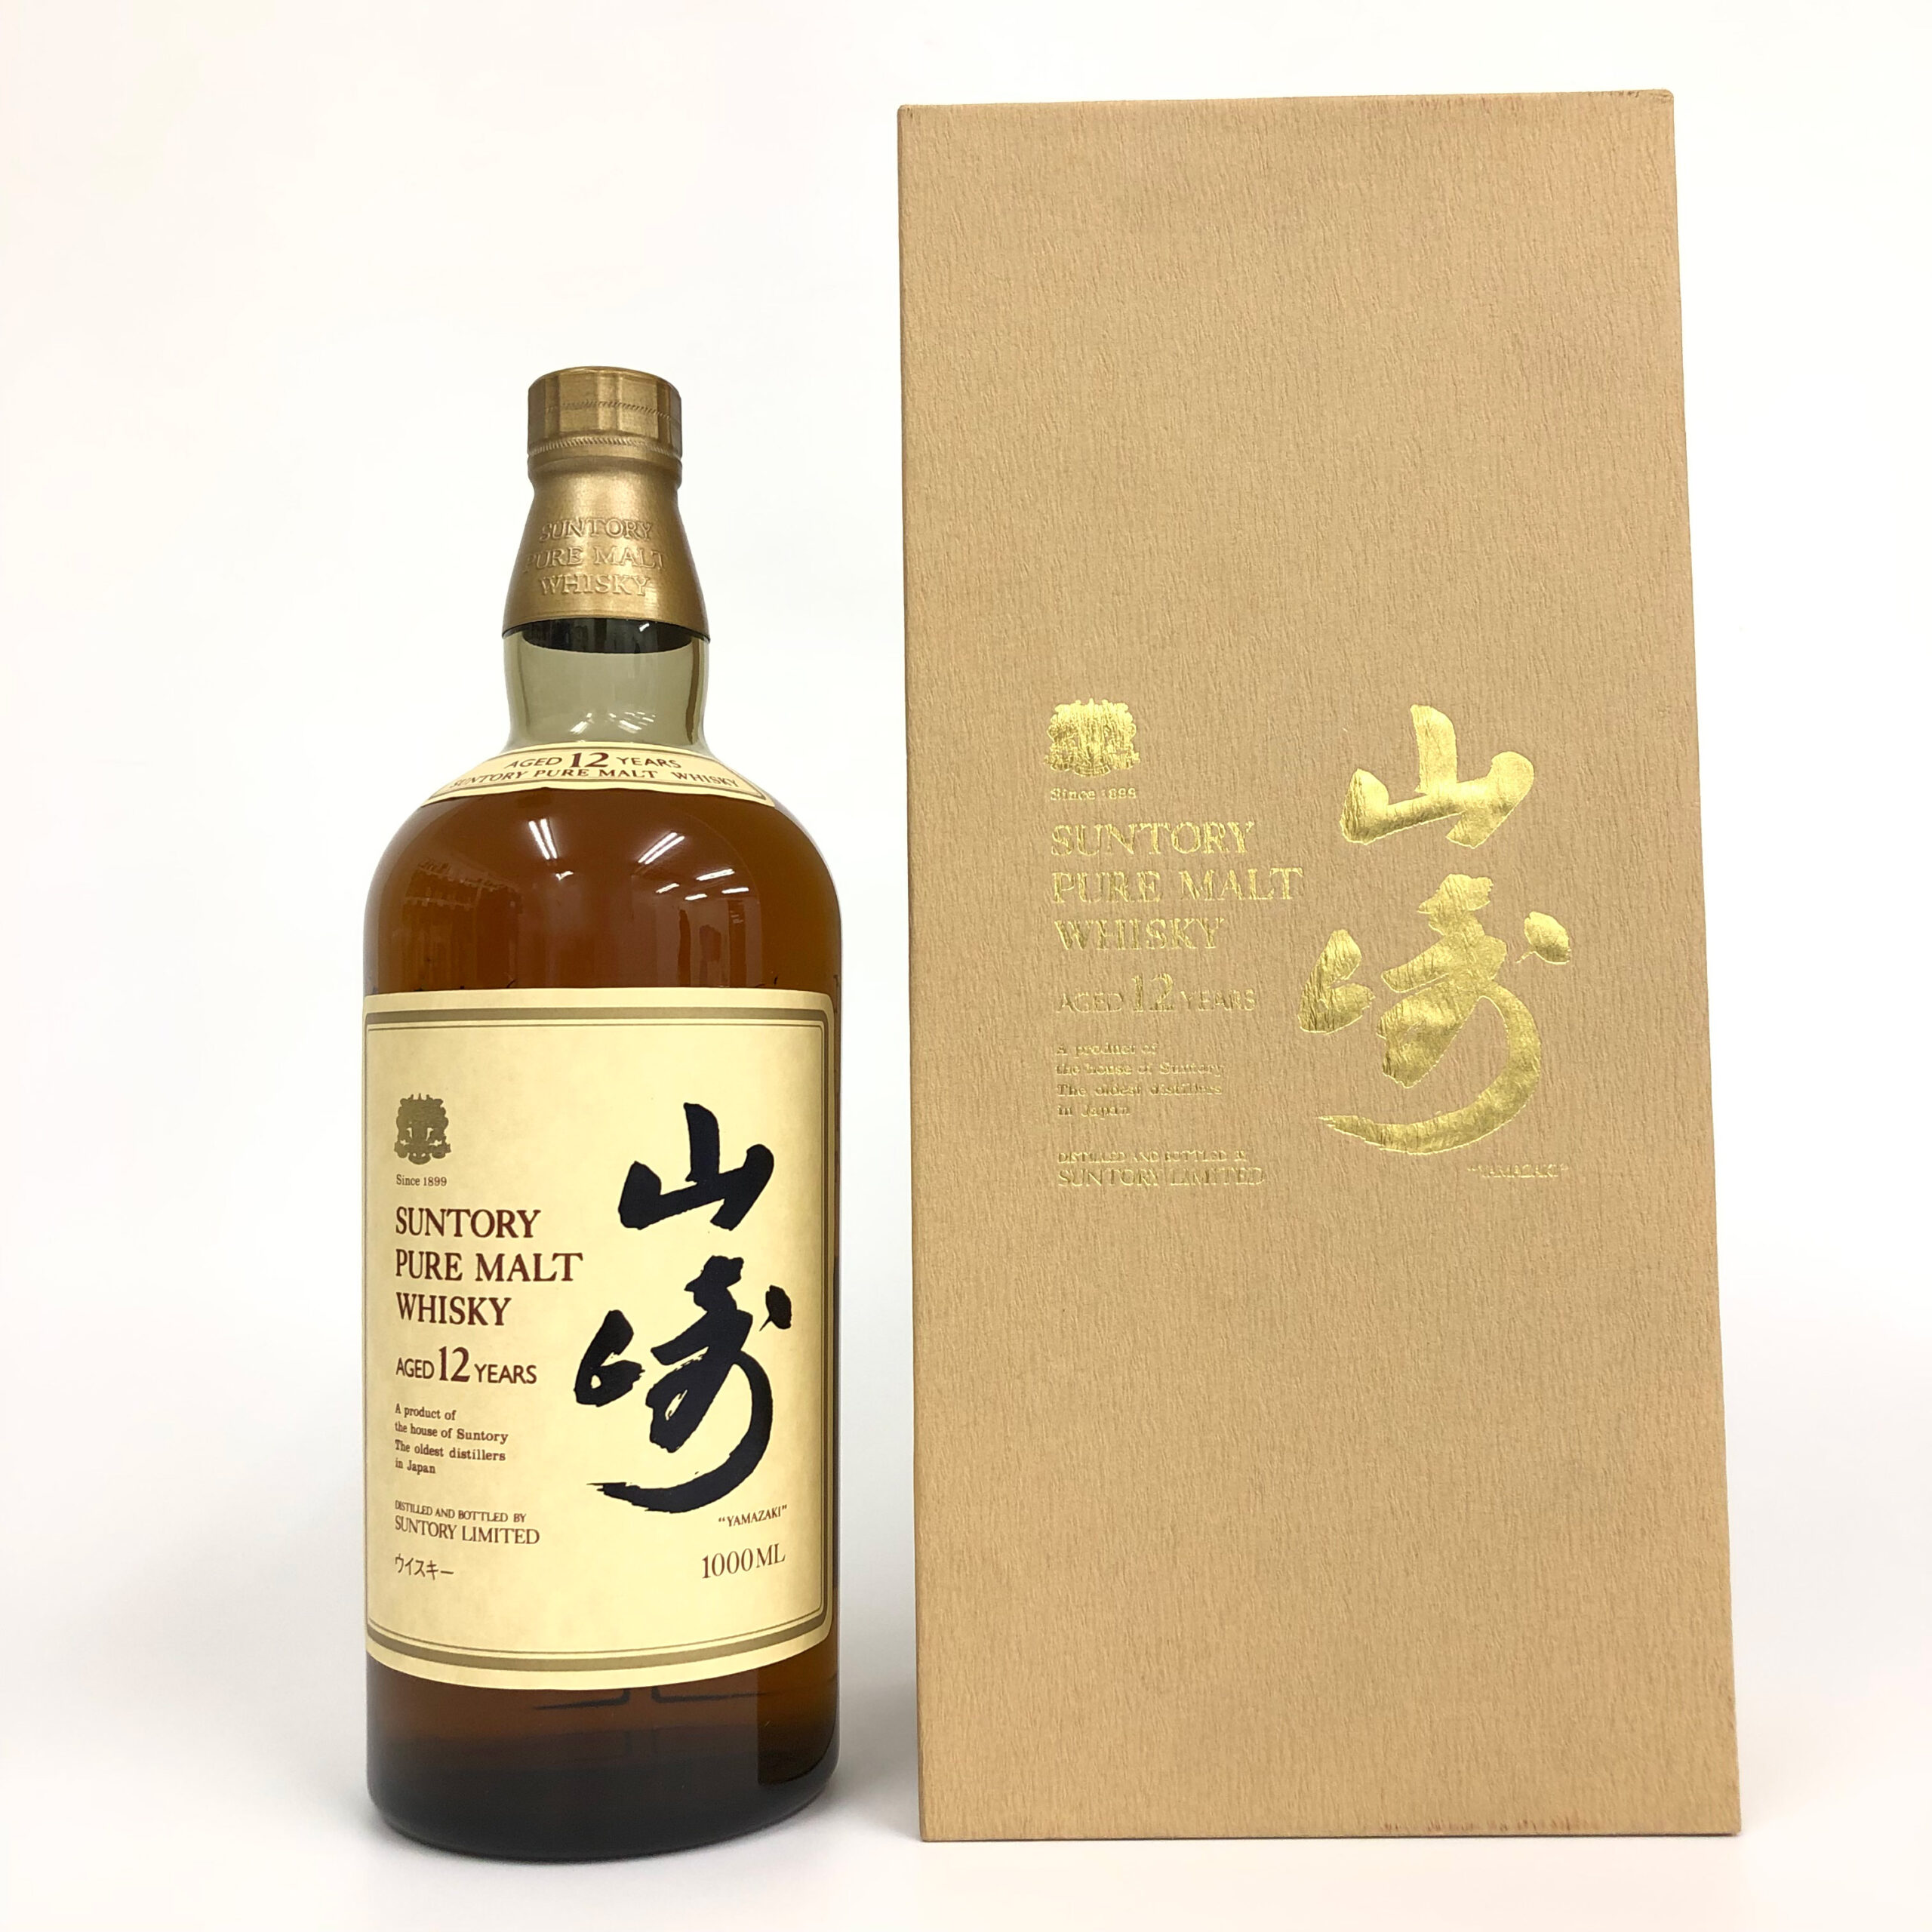 【Suntory Yamazaki series.】「Yamazaki 12year Pure Malt」Single malt whisky made exclusively from the original spirit produced at the Yamazaki distillery in Kyoto Prefecture. Sold as a limited edition and garnered tens of millions of yen in sales